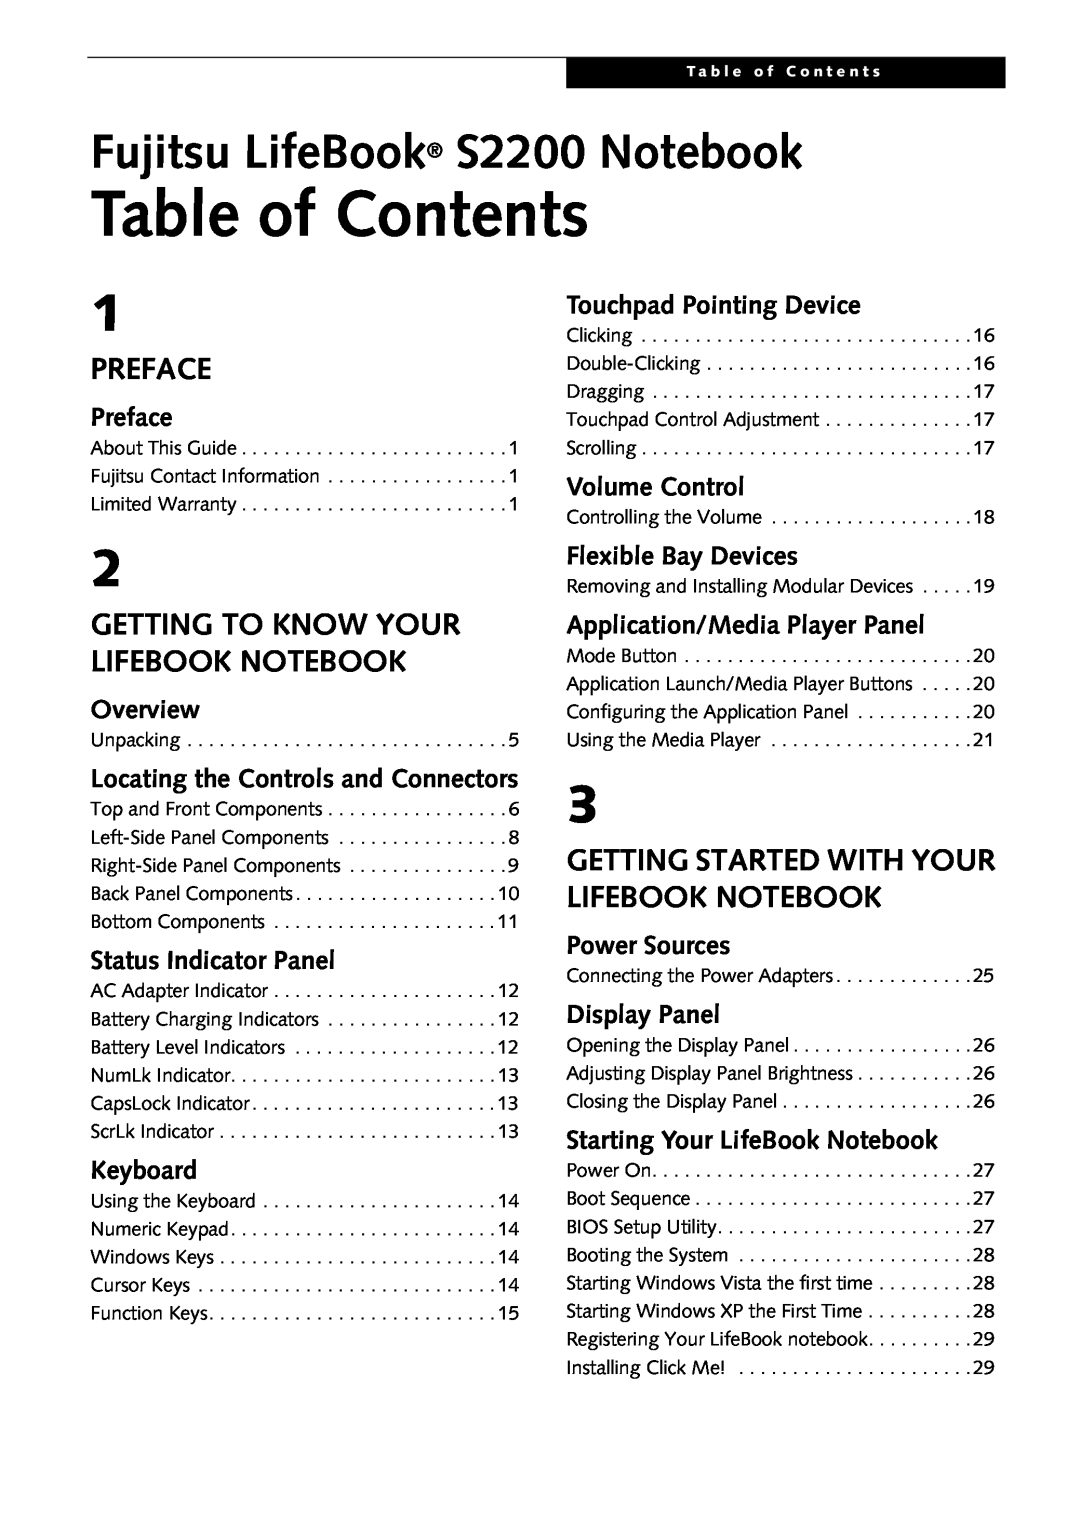 Fujitsu Siemens Computers S2210 manual Table of Contents, Preface, Getting To Know Your Lifebook Notebook 